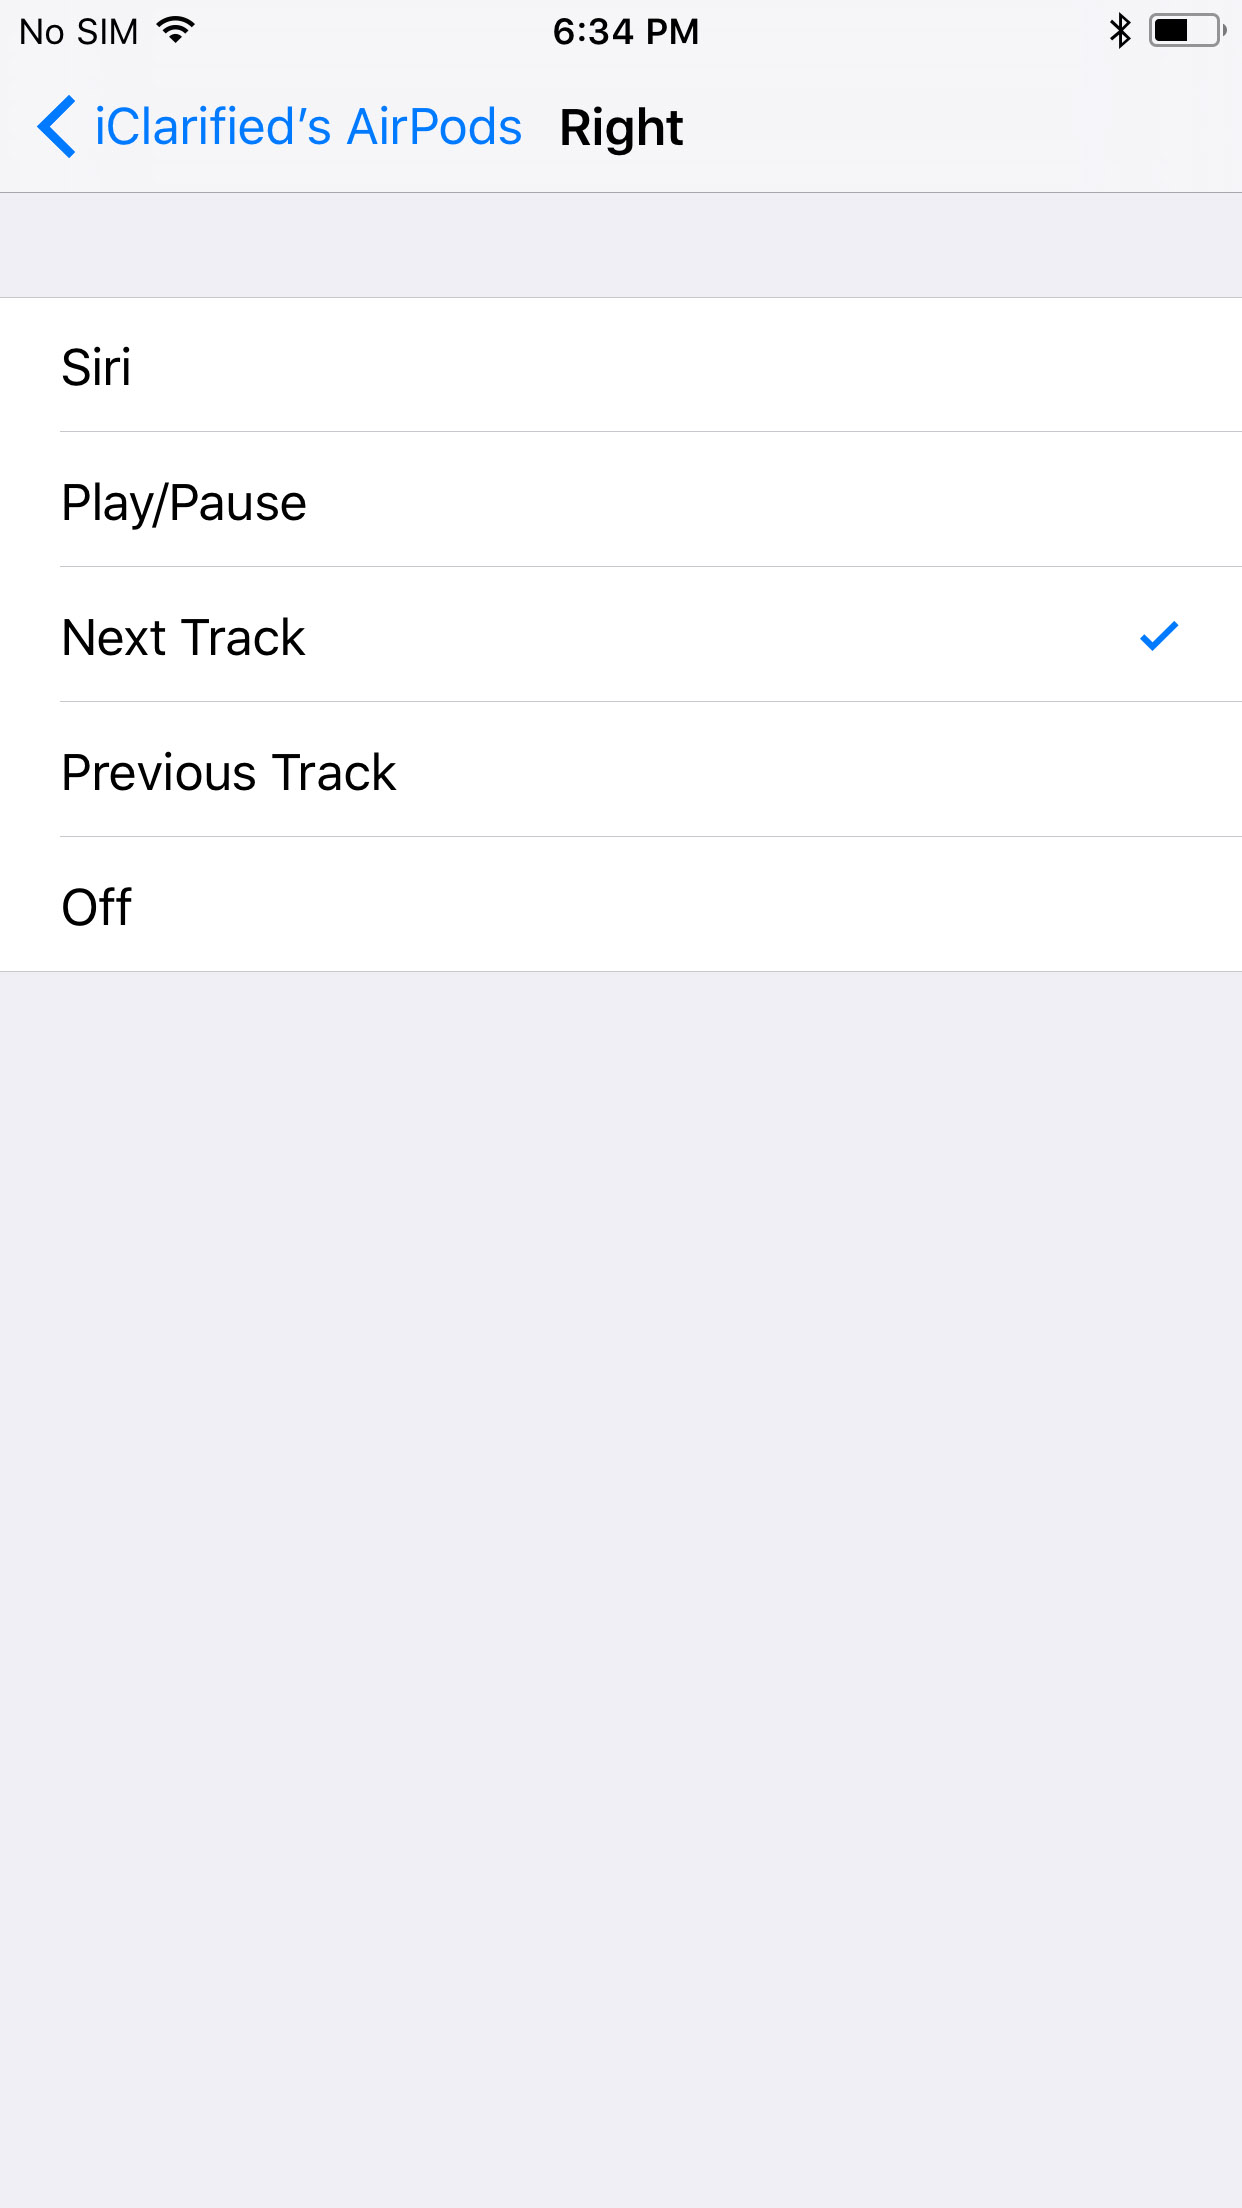 iOS 11 Adds Next Track and Previous Track Functionality to AirPods